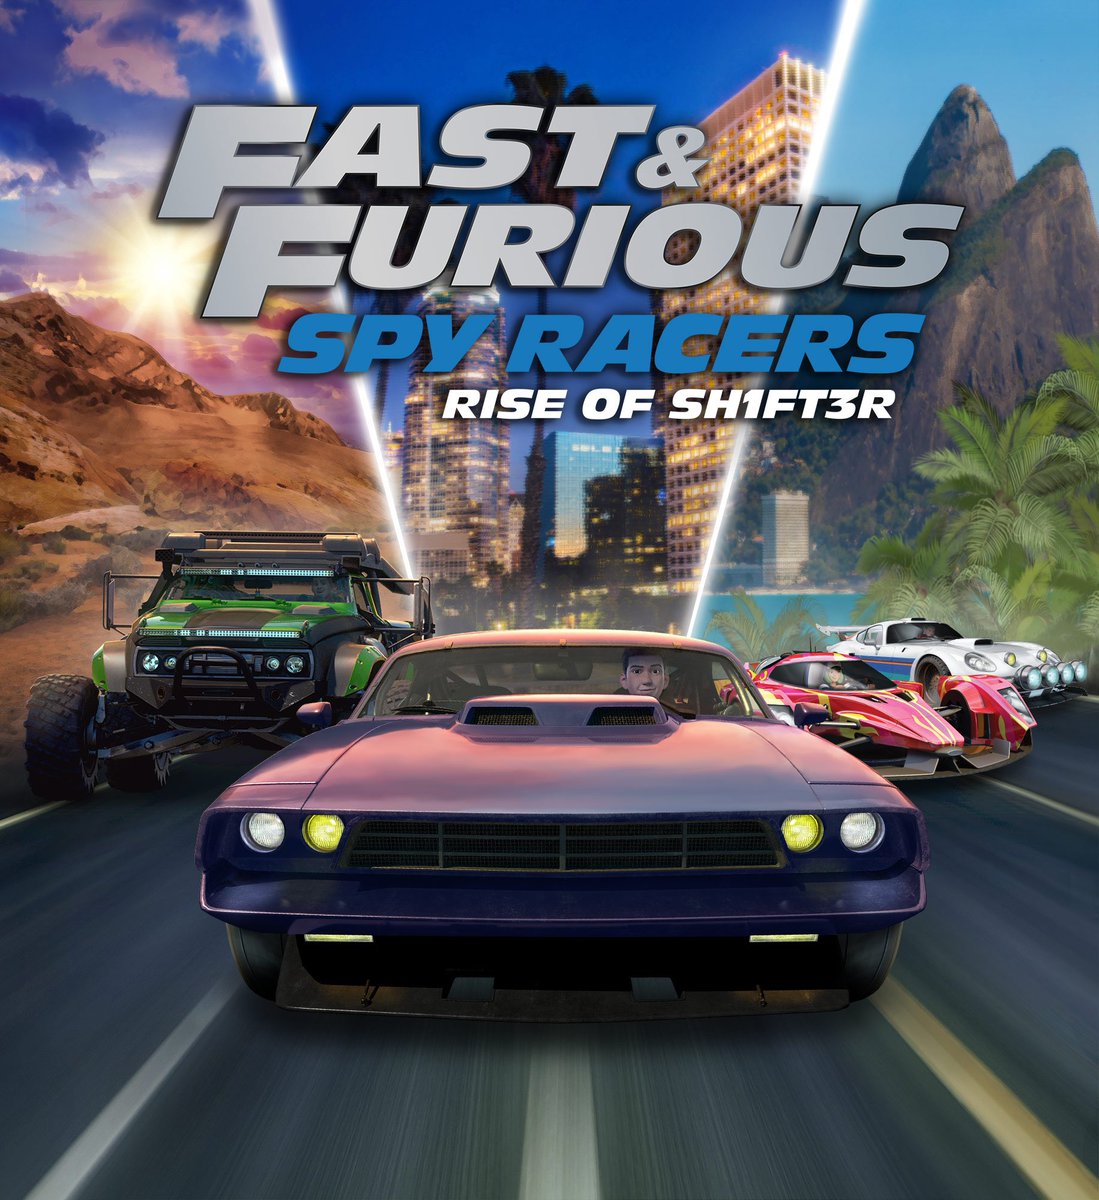 The first videogame of Fast & Furious: Spy Racers is out today! I can’t wait to see everyone playing as their favorite Spy Racer on a high speed mission to stop SH1FT3R. It's got the coolest cars and tracks from the show. @Outright_Games #FastFuriousSpyRacers #RiseOfSH1FT3R